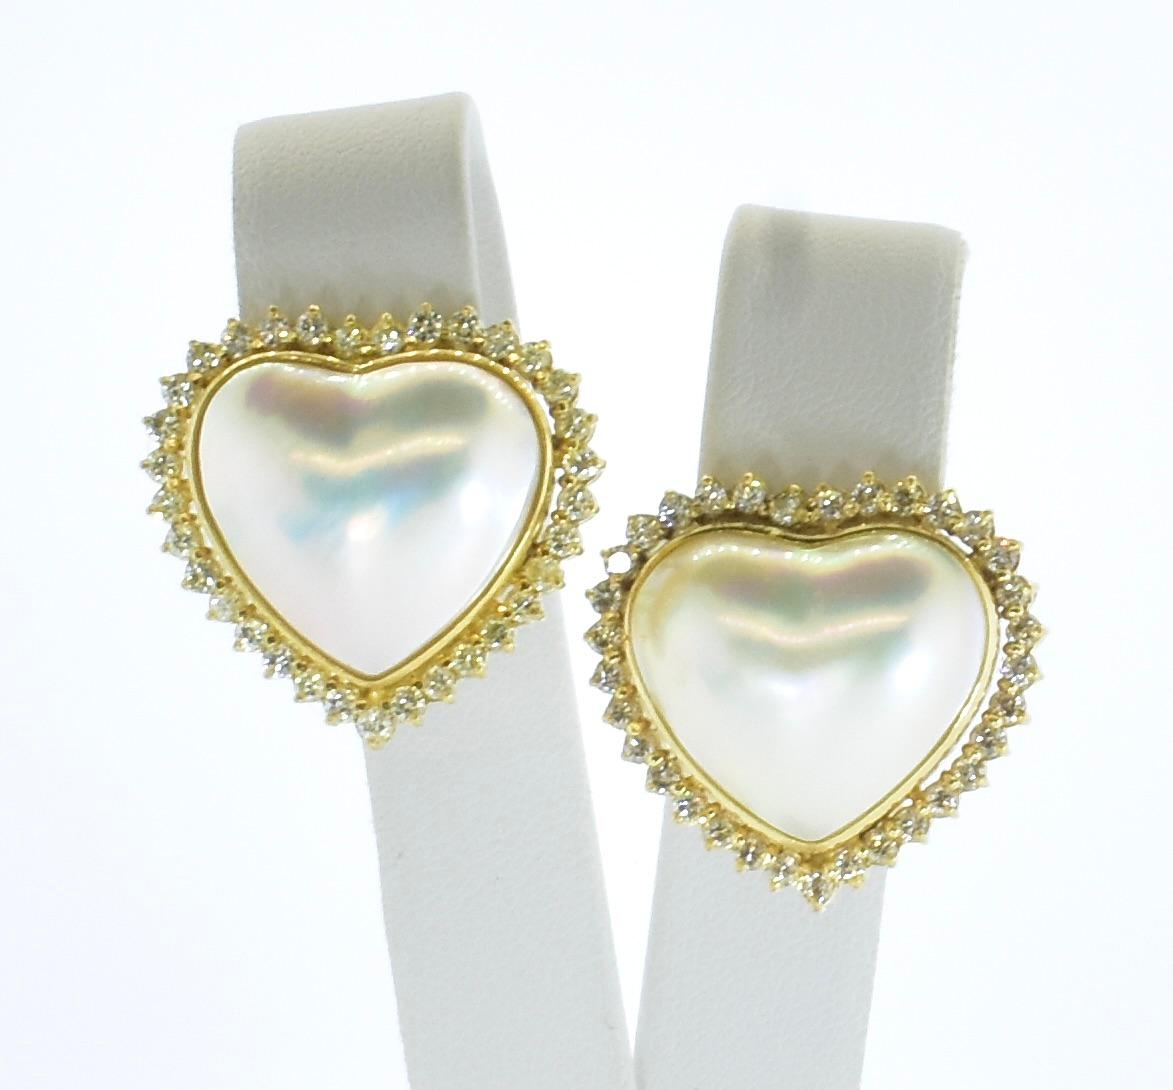 Contemporary Yellow Gold, Mabe Fancy Heart Shaped Pearls and Fine White Diamond Earrings.